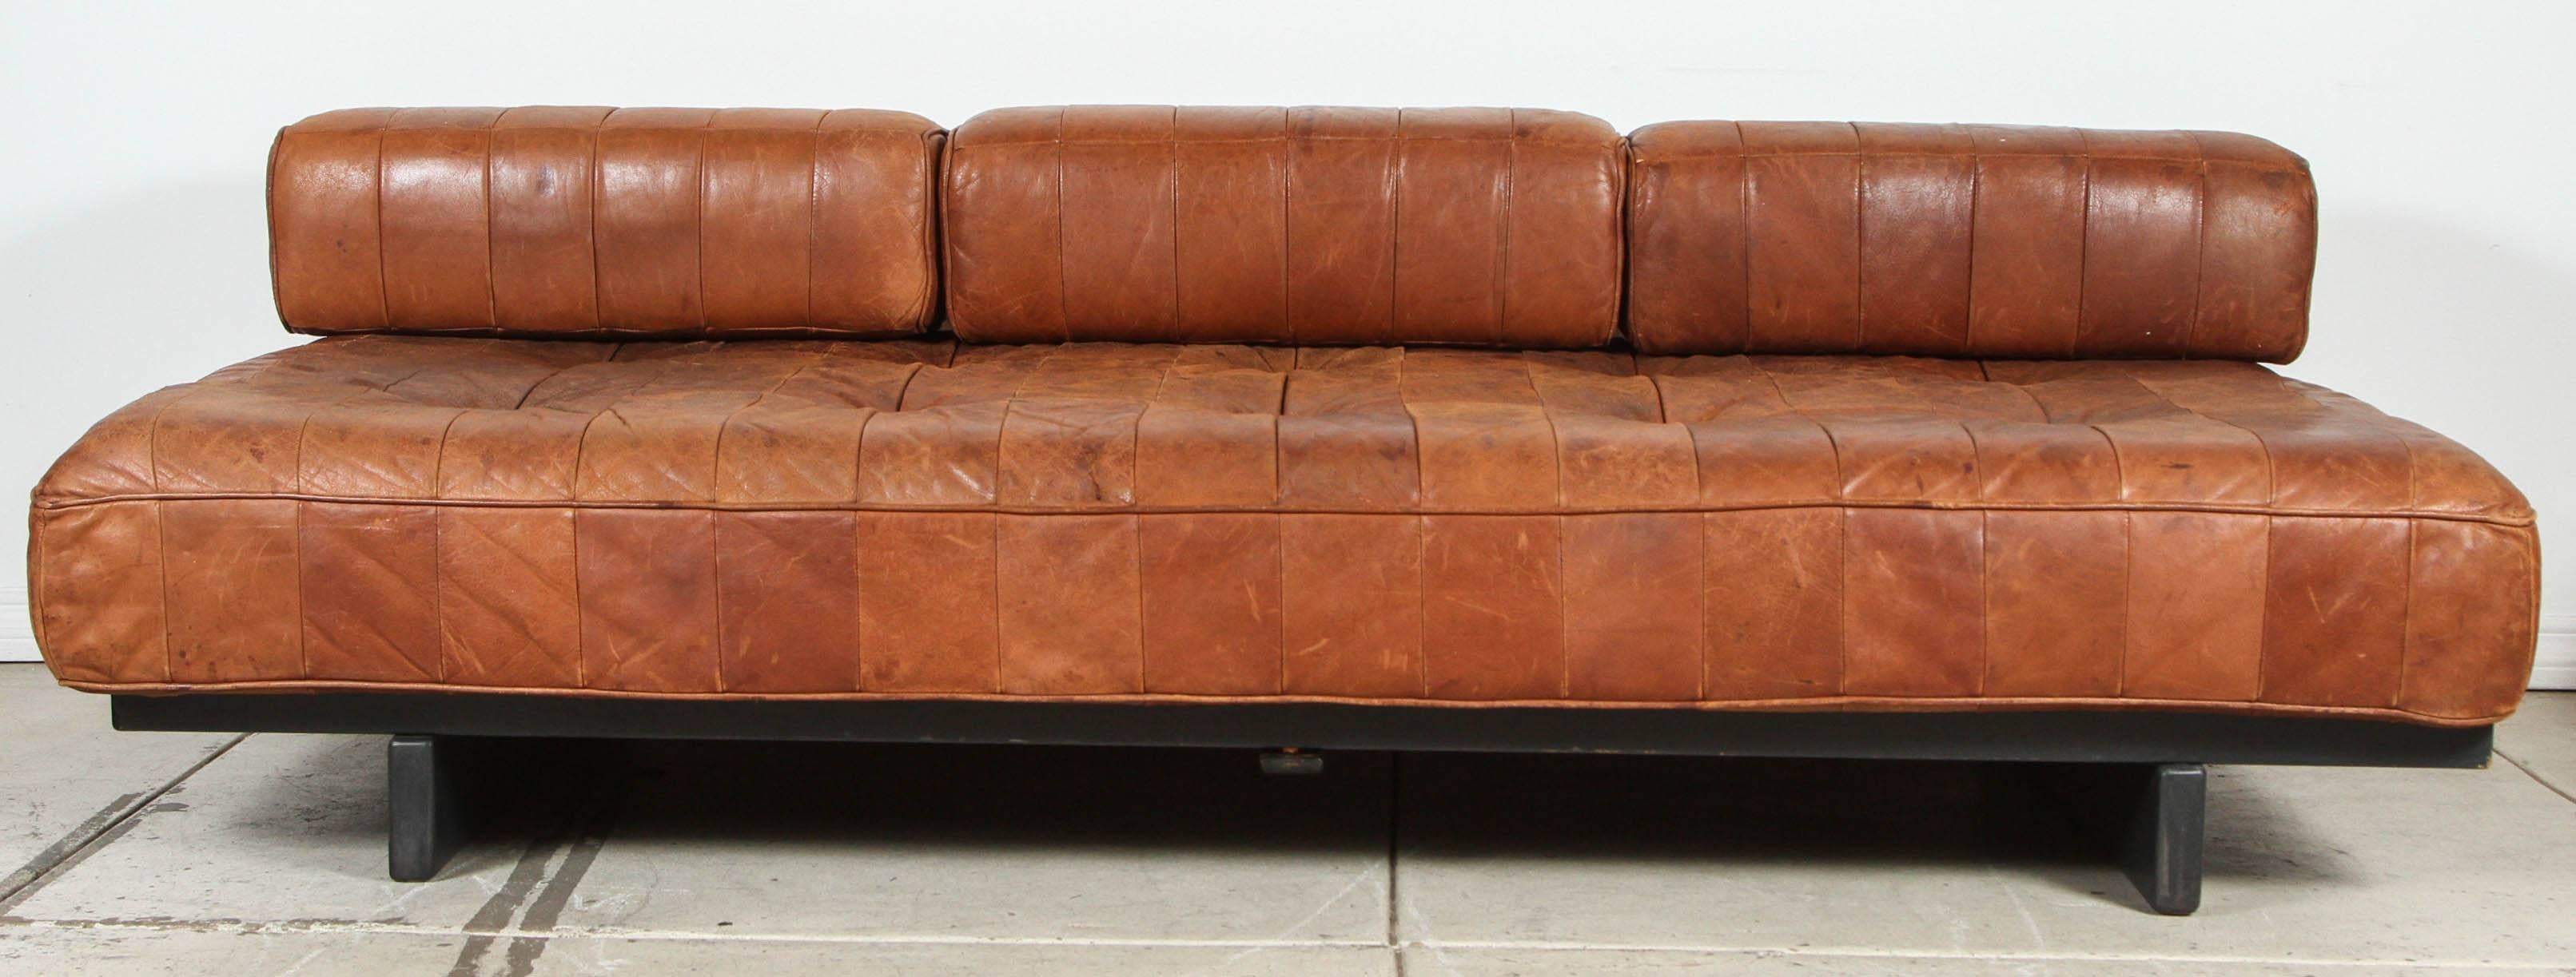 Patchwork leather daybed with three matching back cushions on wooden slat framework. Beautiful patina, foam in good condition.